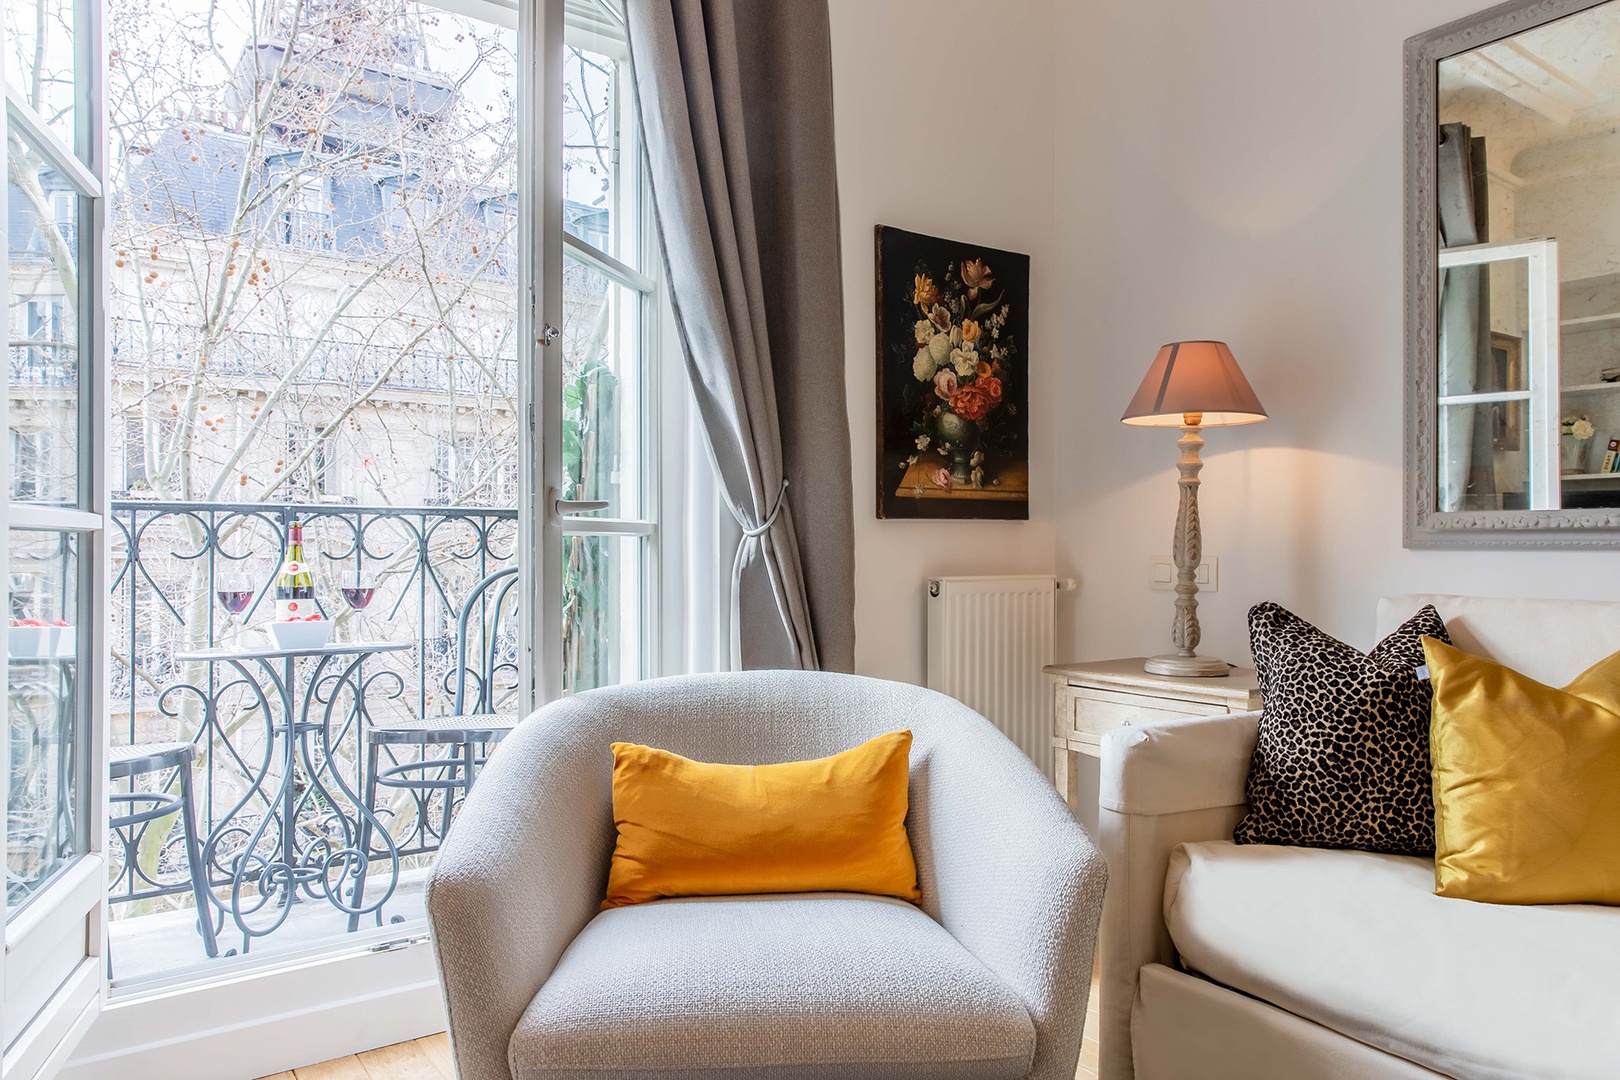 Charming French touches make the Calvados feel like home.